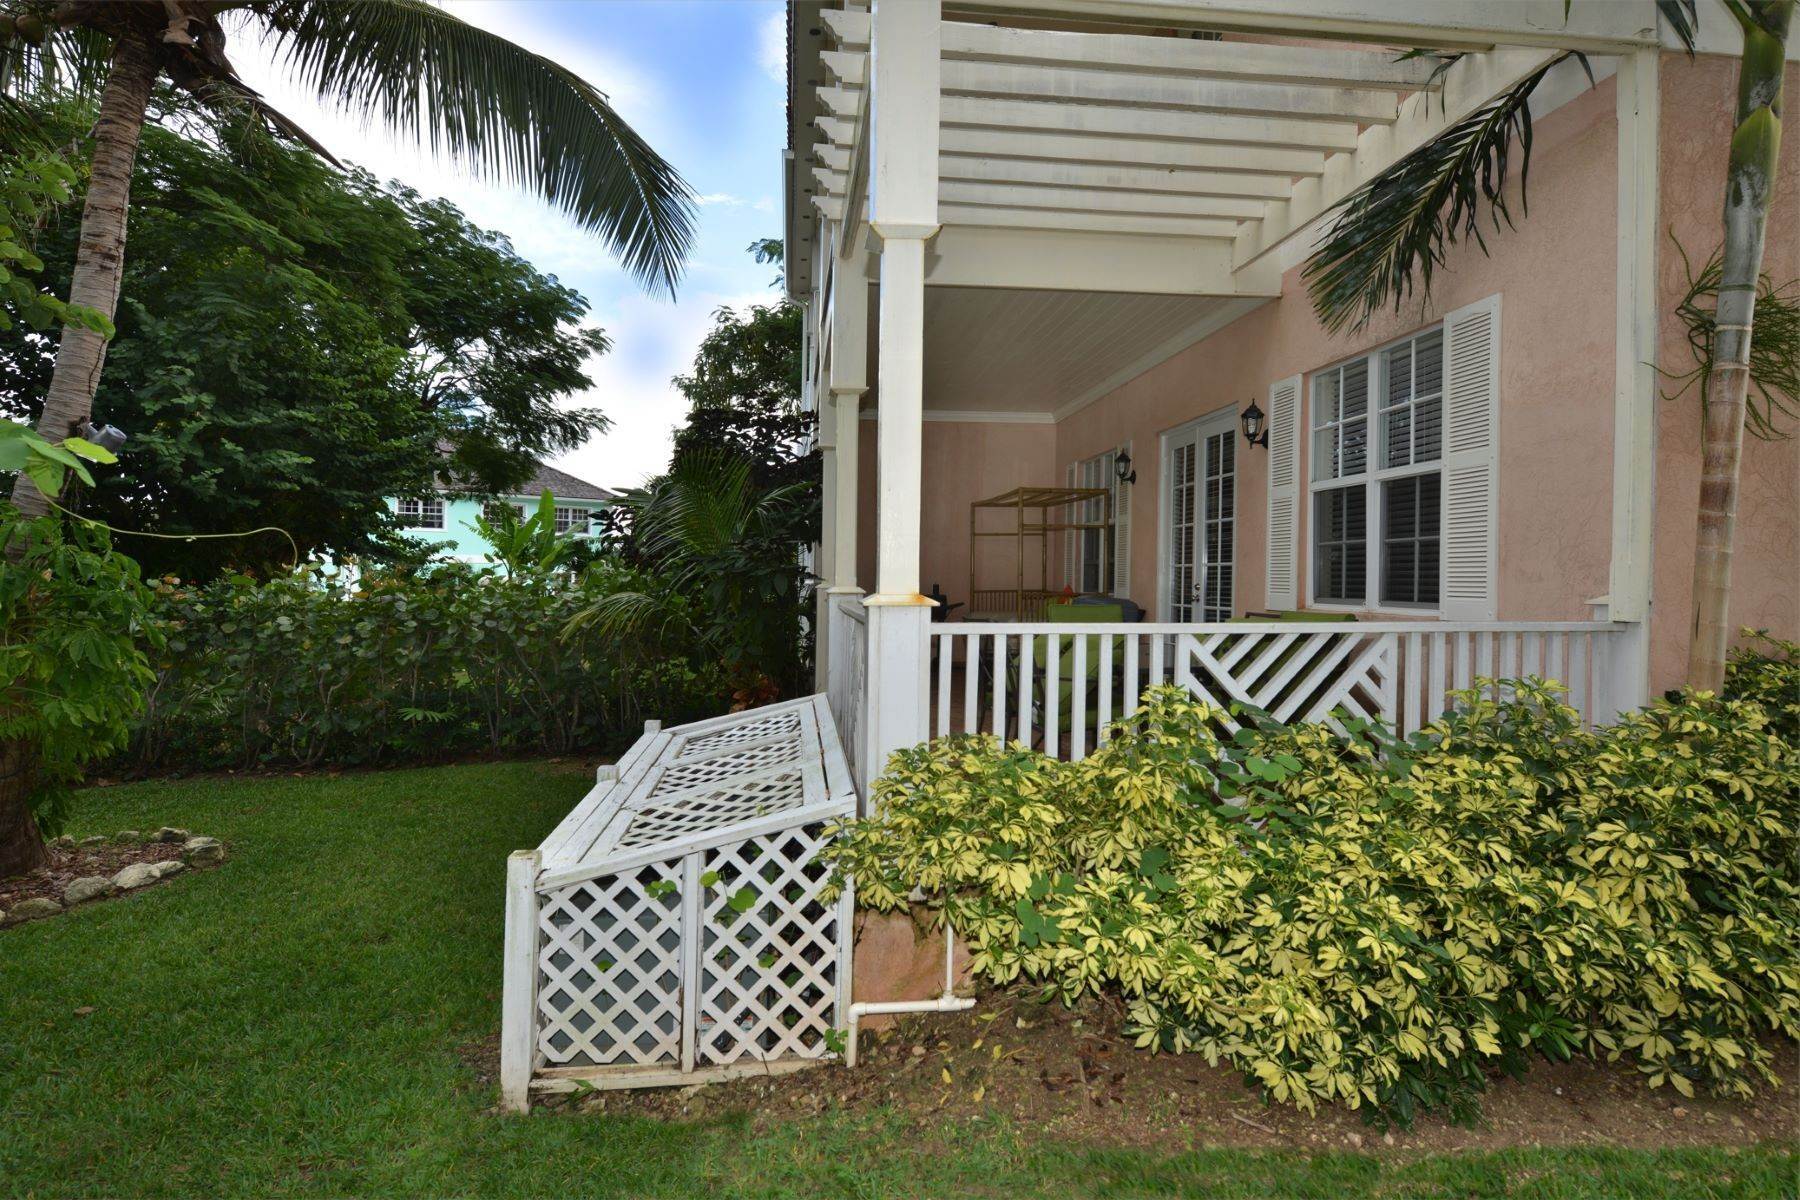 19. Townhouse for Sale at Balmoral GR79 Other Bahamas, Other Areas In The Bahamas, Bahamas